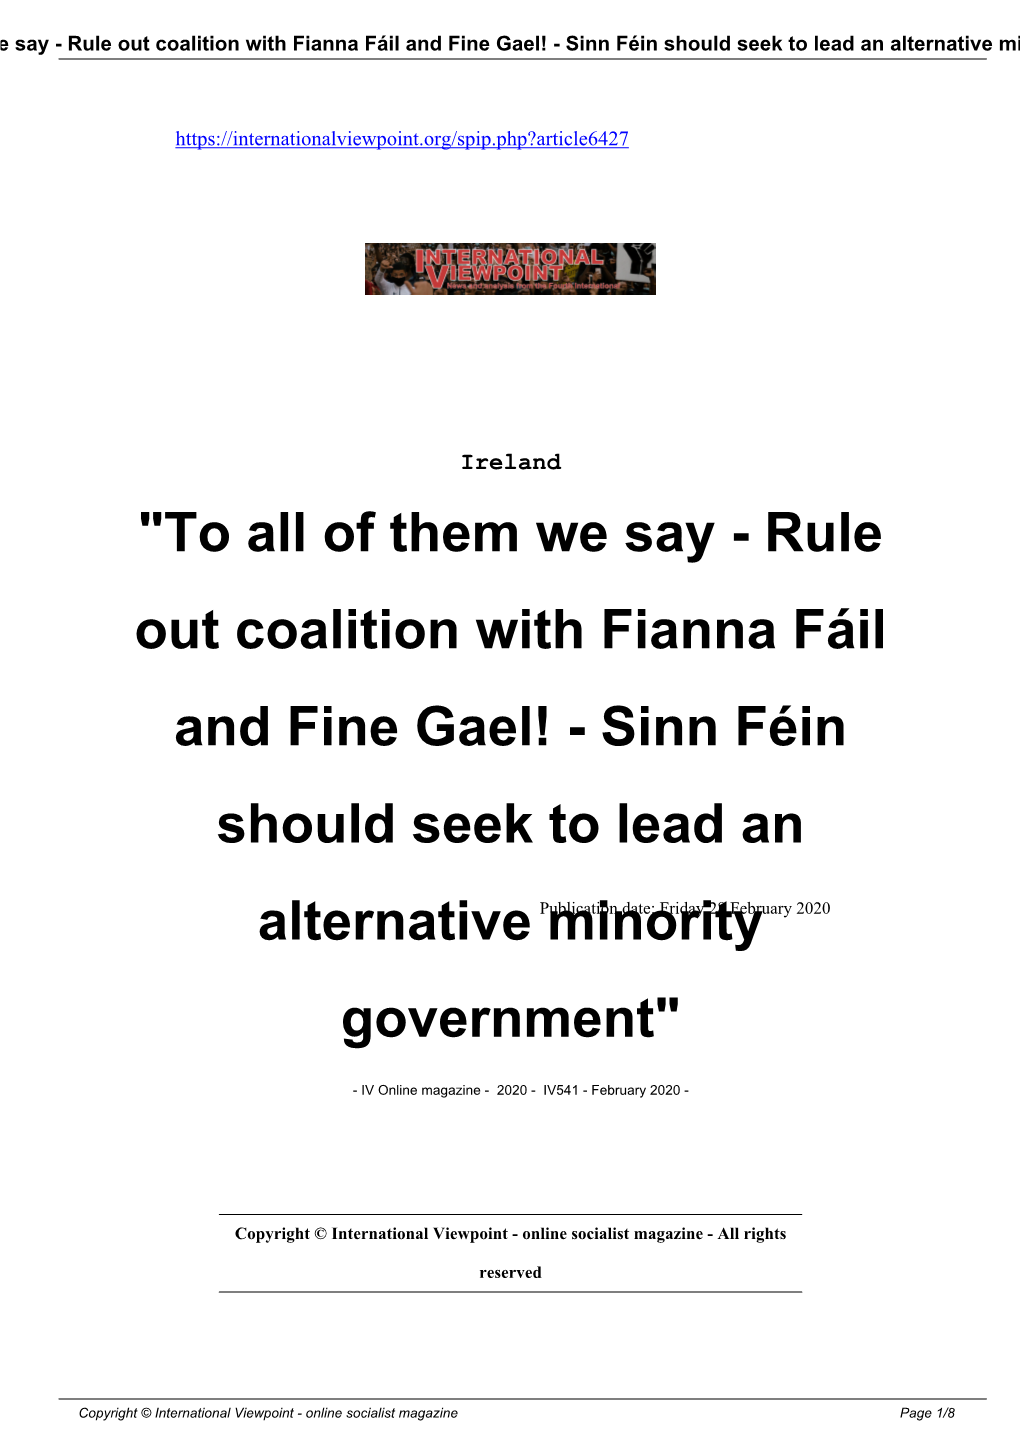 "To All of Them We Say - Rule out Coalition with Fianna Fáil and Fine Gael! - Sinn Féin Should Seek to Lead an Alternative Minority Government"